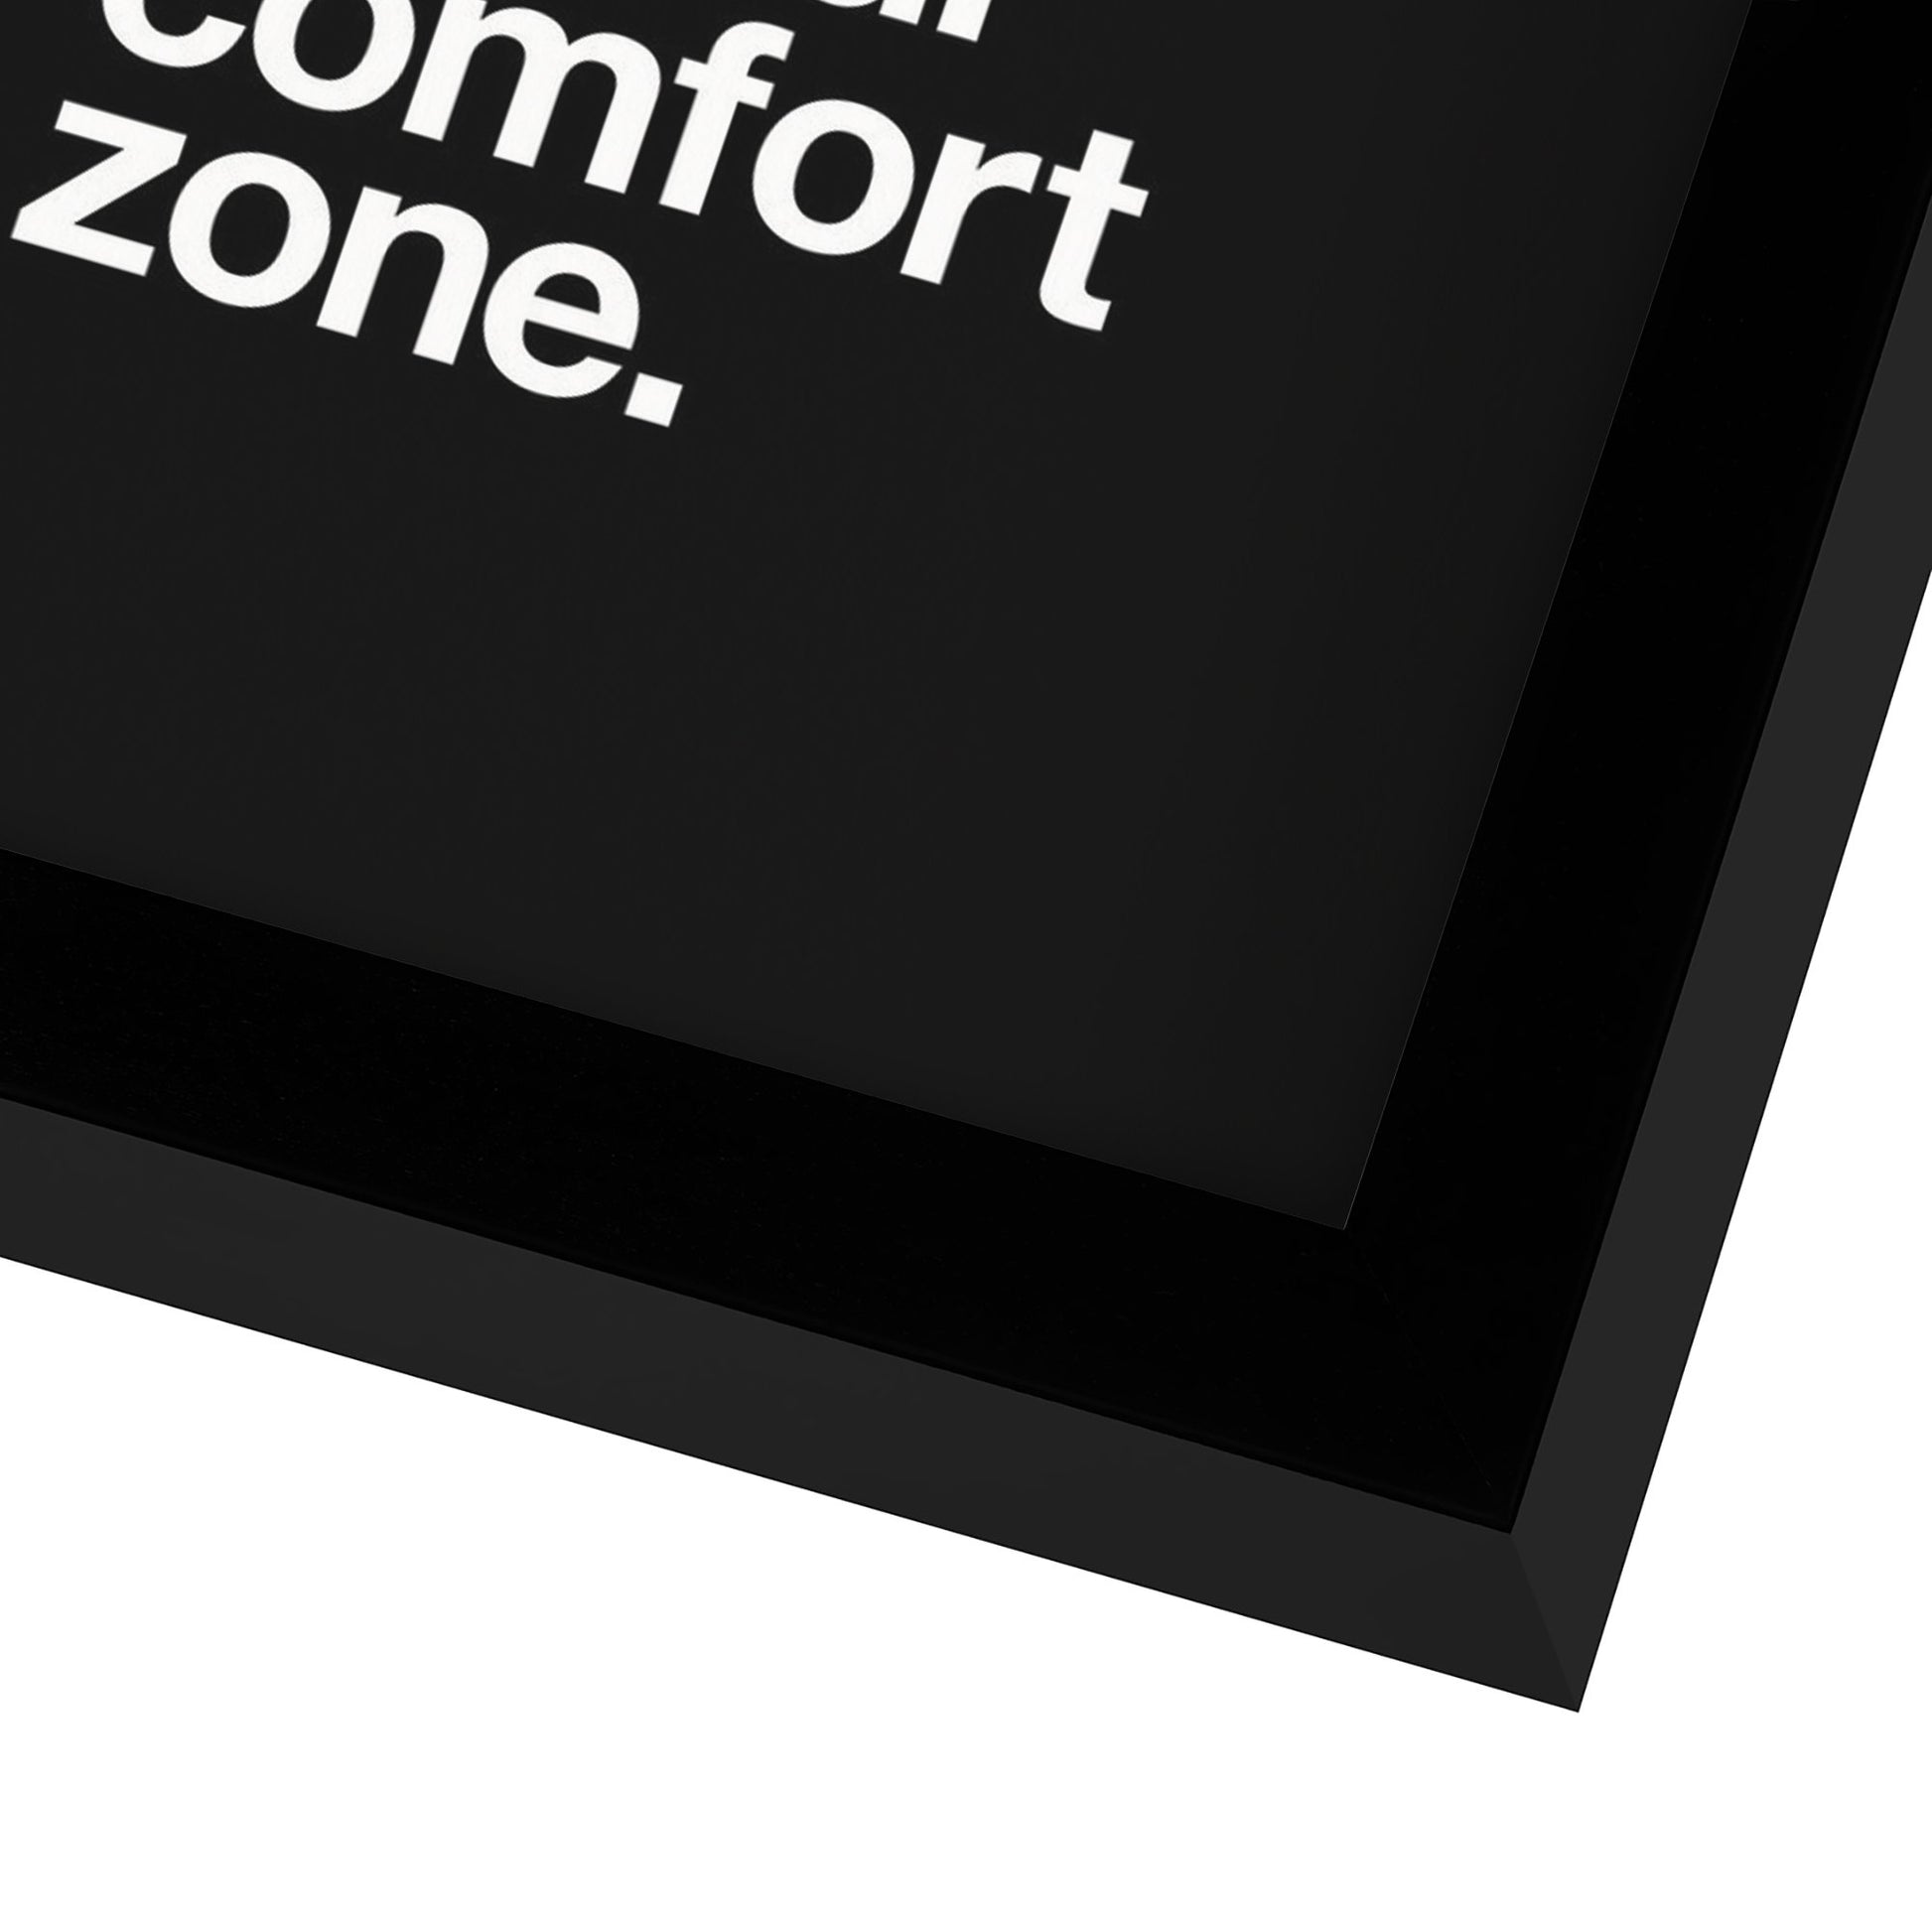 Life Begins At The End Of Your Comfort Zone By Motivated Type - Shadow Box Framed Art - Americanflat